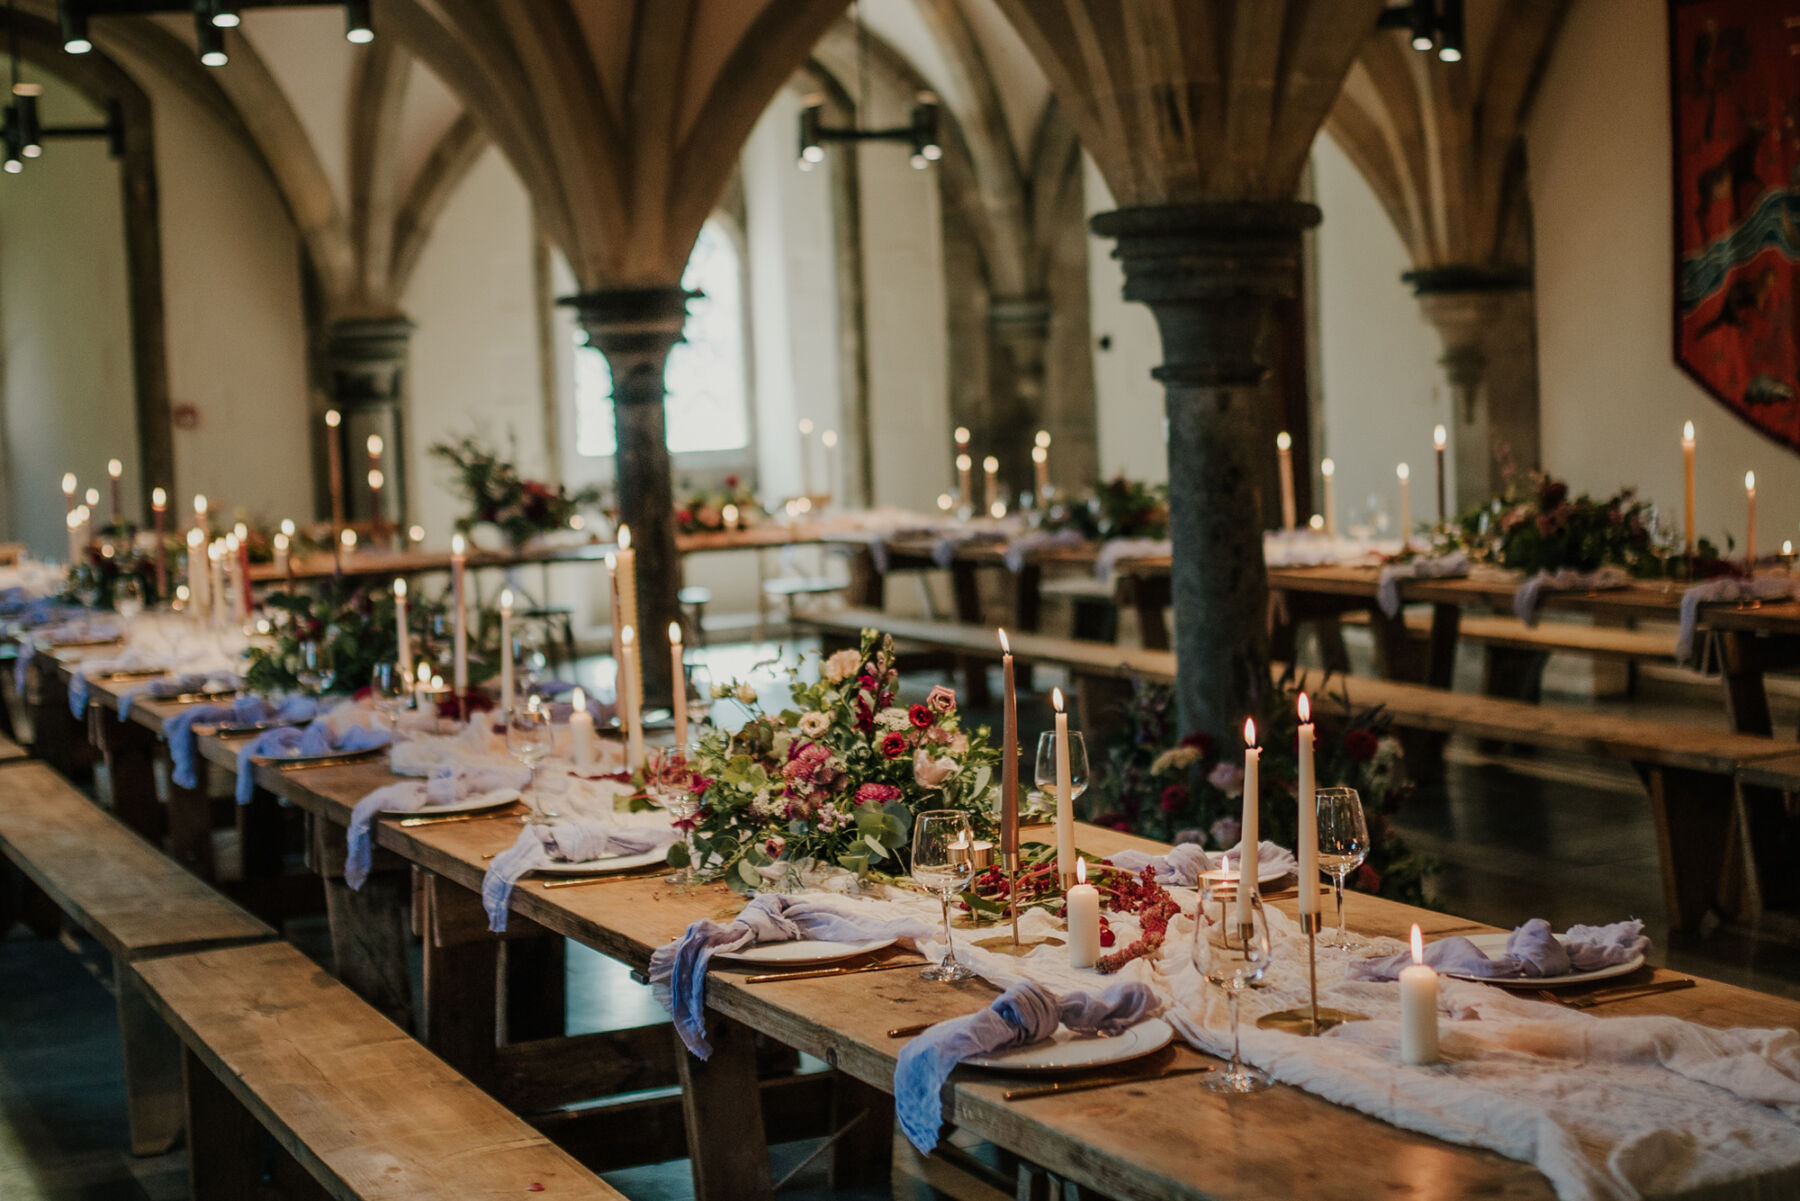 Romantic, candlelit wedding reception on long trestle tables with linen table runners. Bishop's Palace historic wedding venue in Wells, Somerset.